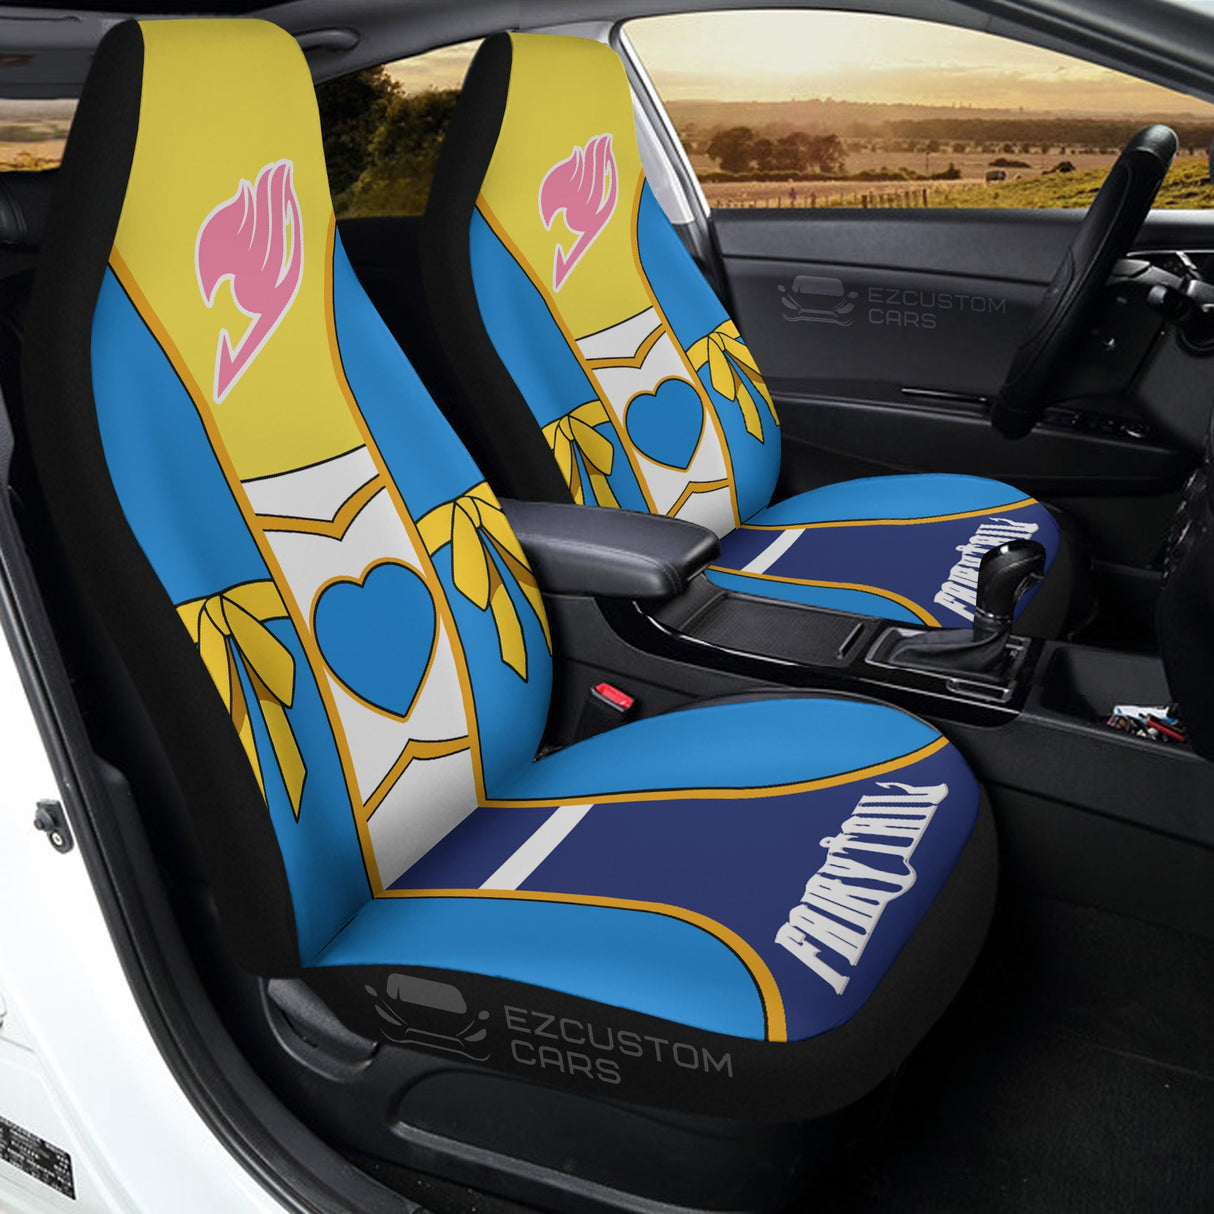 Anime Sexy Girl Mirajane Strauss Car Seat Covers Custom Fairy Tail Anime Gifts For Fans, everythinganimee